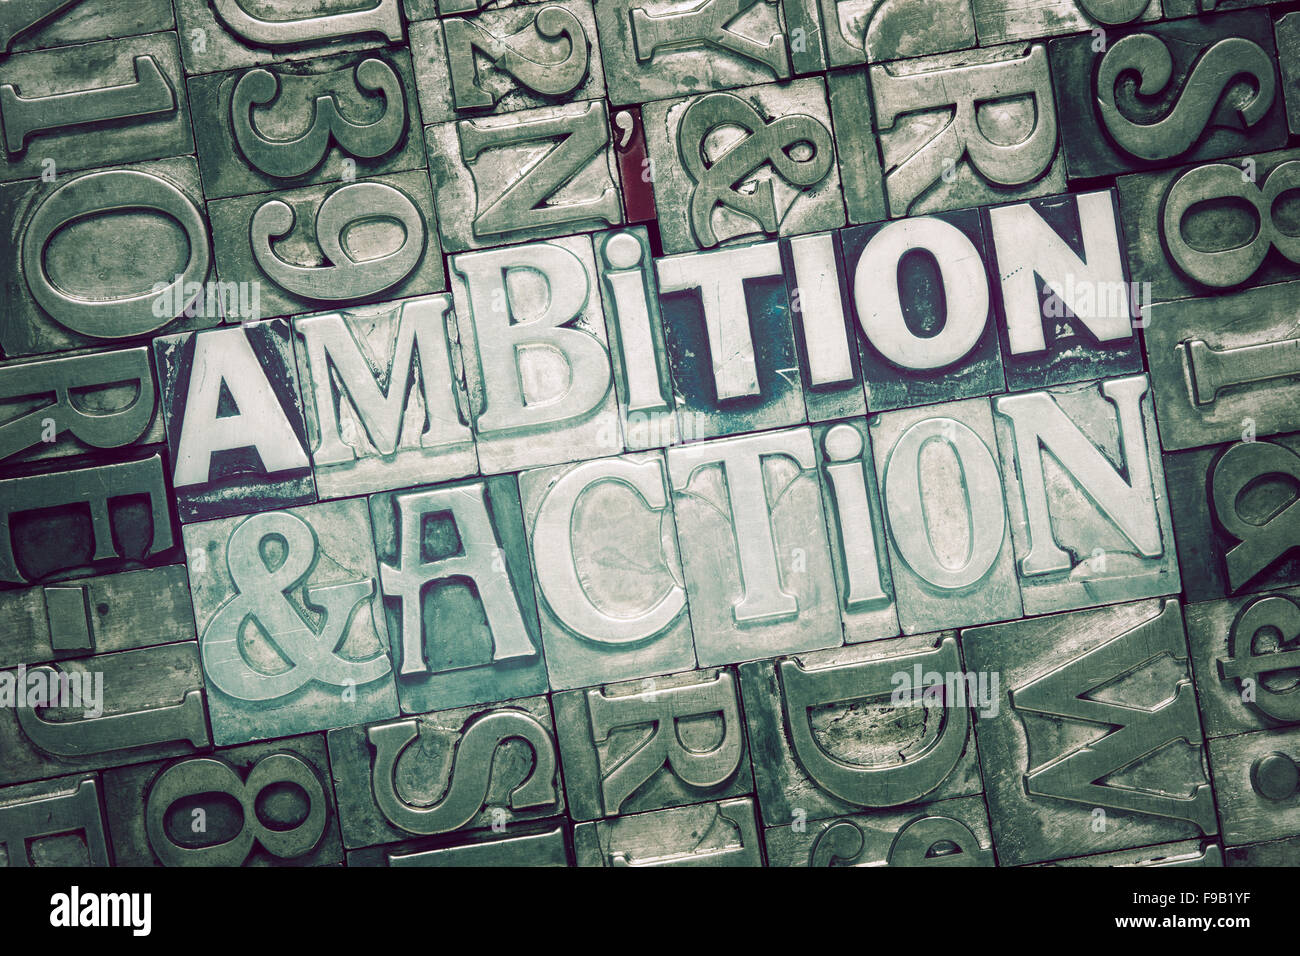 ambition and action words concept made from metallic letterpress blocks on letters background Stock Photo